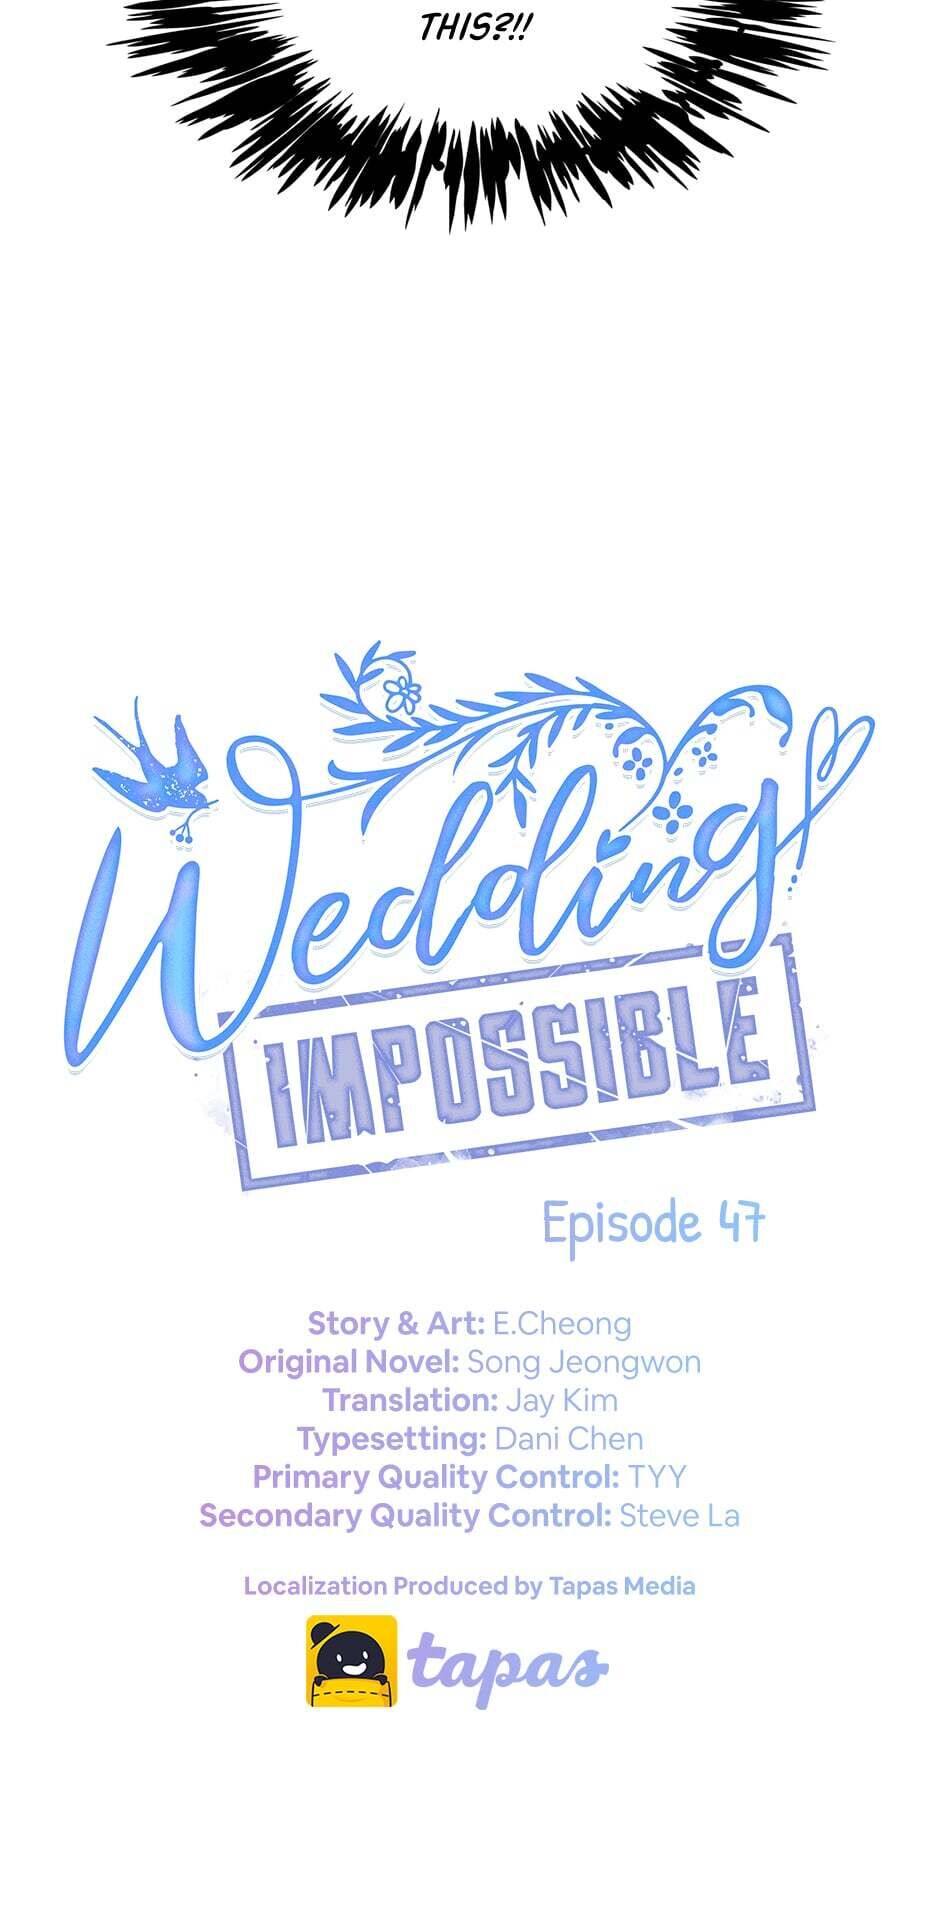 Wedding Impossible - Page 3